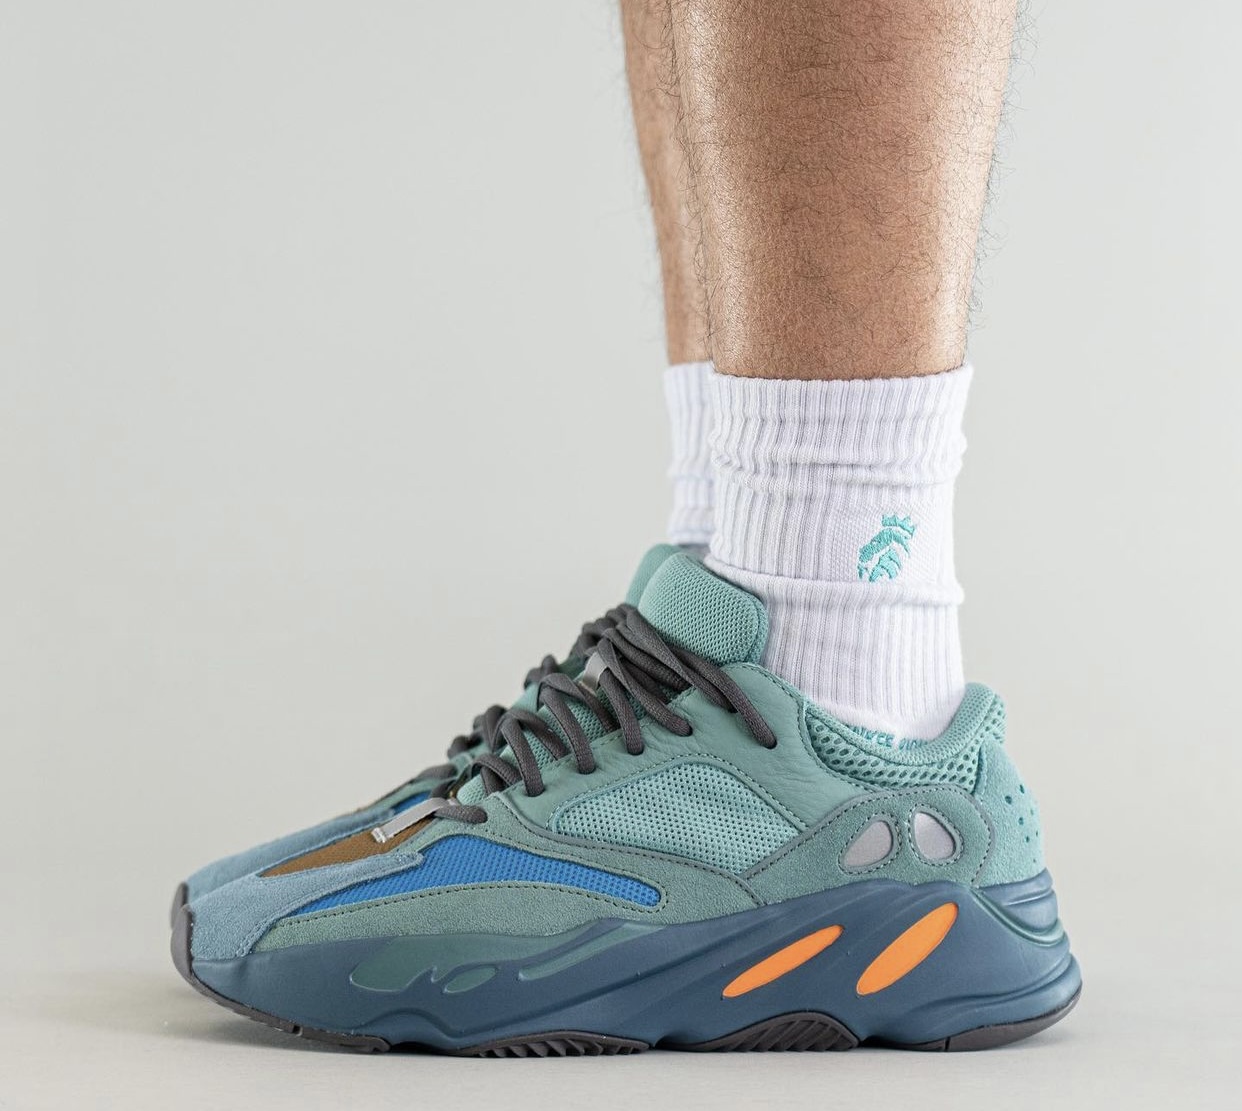 adidas Yeezy Boost 700 Faded Azure GZ2002 Release event On Feet 1